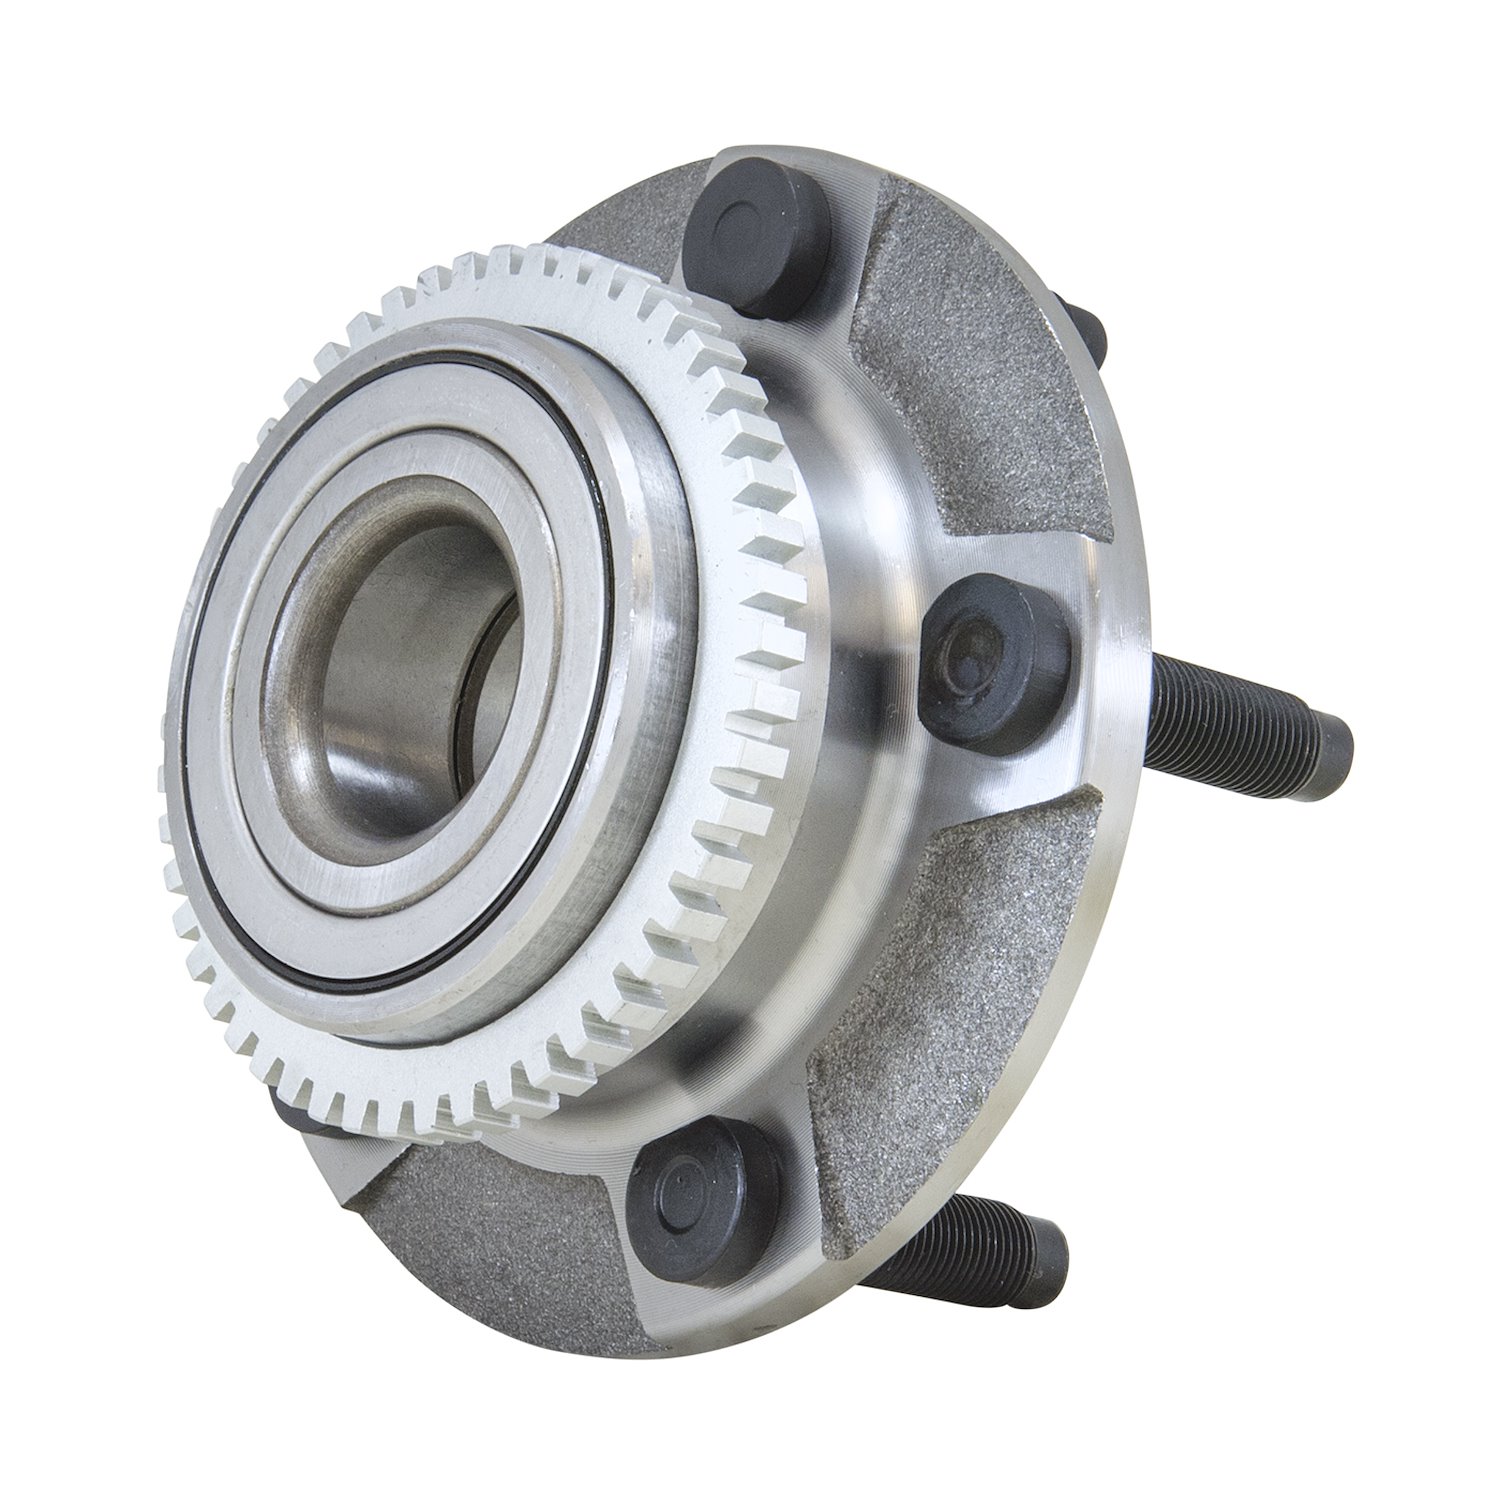 Replacement Unit Bearing Hub For '94-'04 Mustang Front